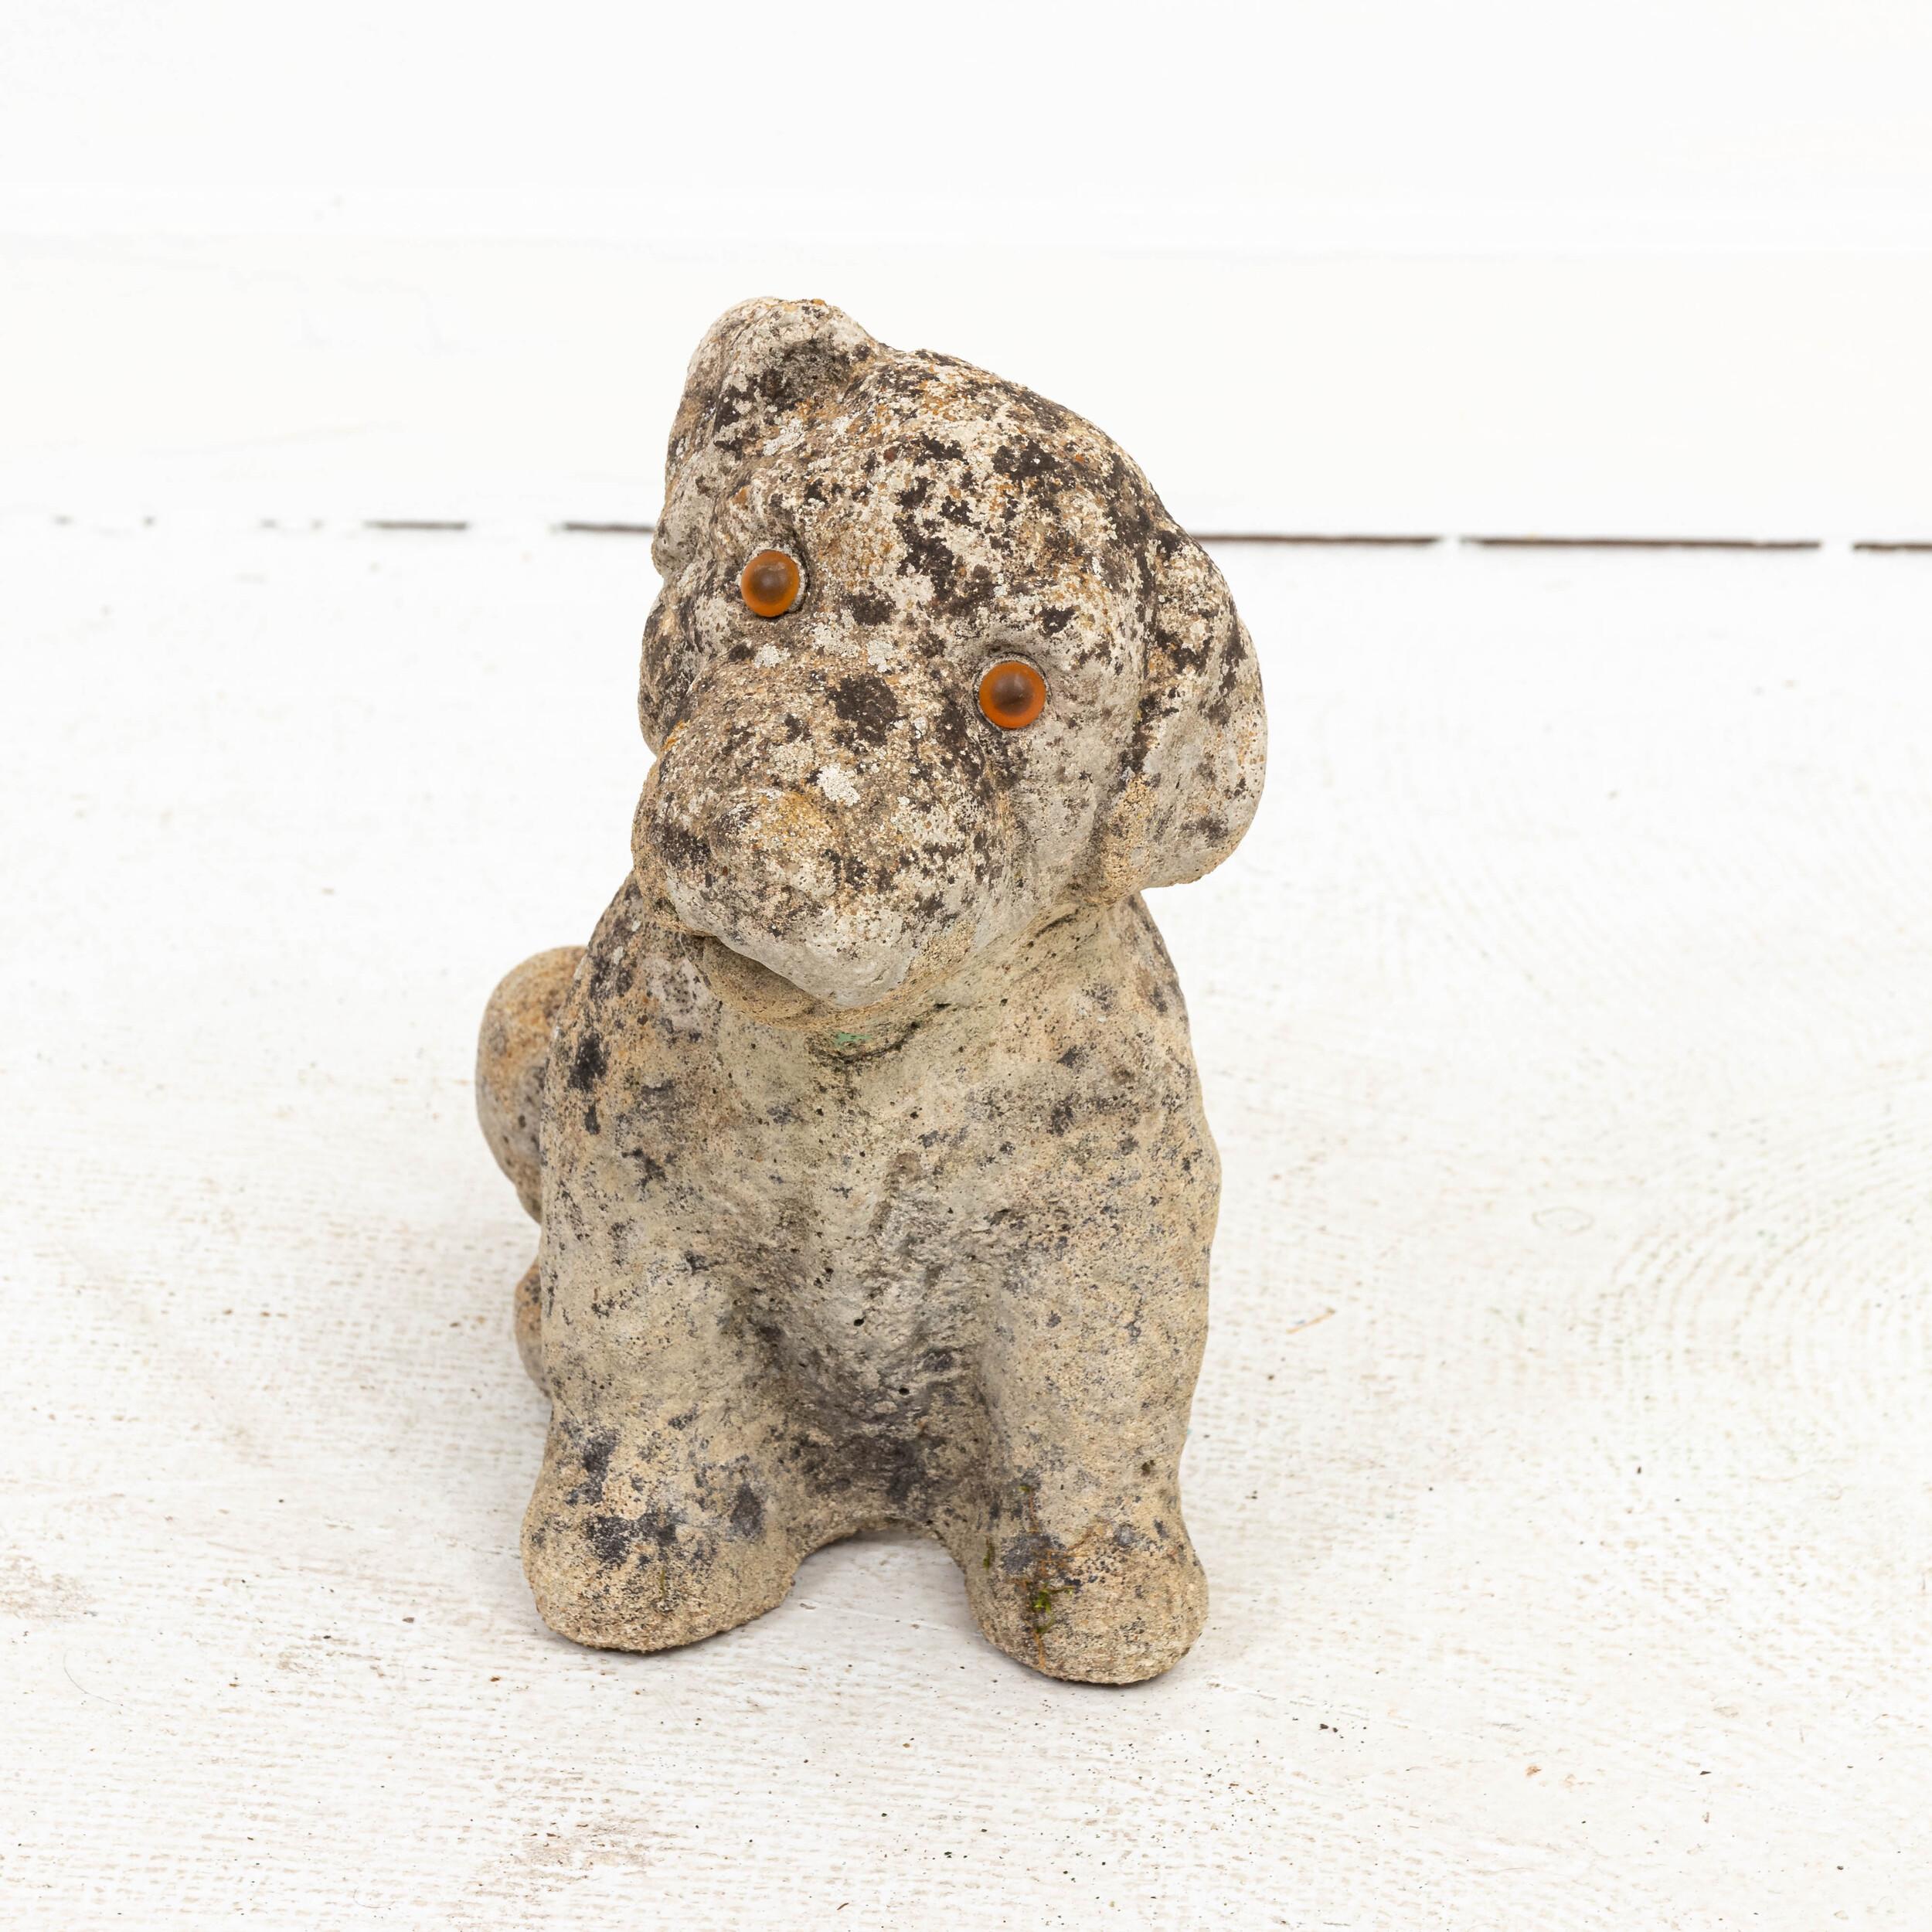 Unique cast stone garden statue of a puppy with striking amber eyes. Made in England circa early 1900s. Original garden patina with moss covering adds to its character.